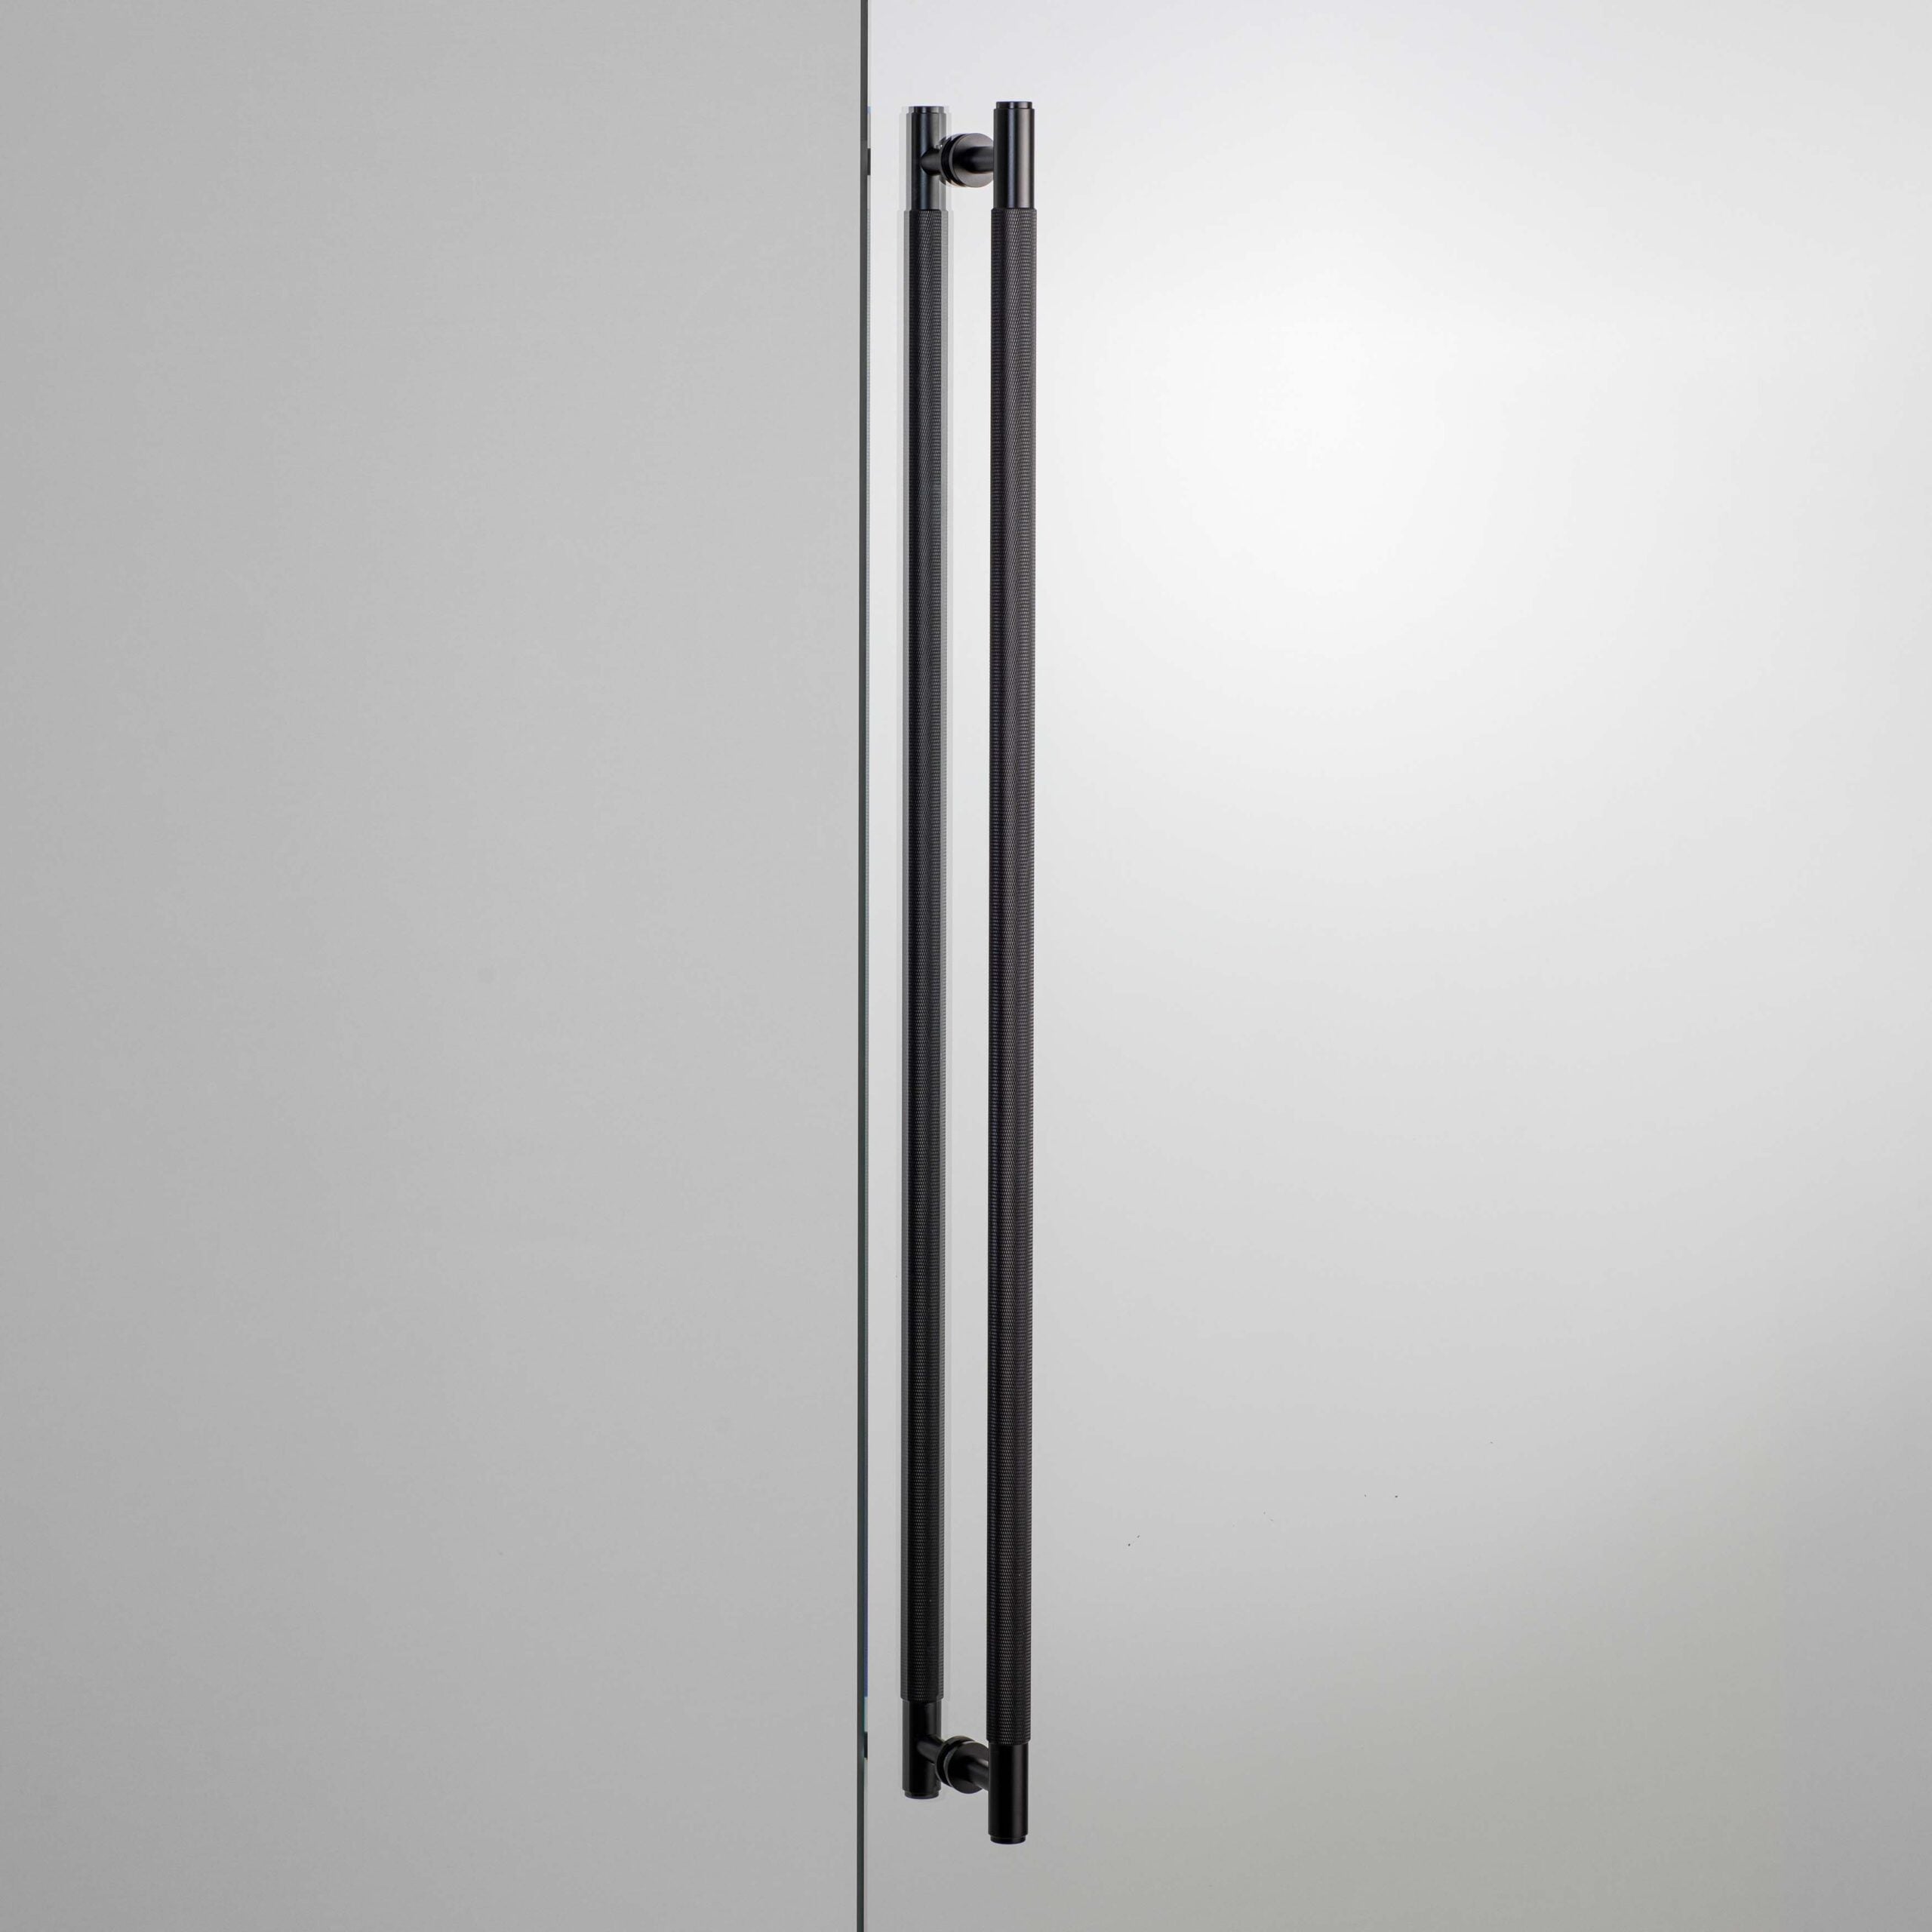 Buster + Punch - NCB-02394 - Double-Sided Closet Bar - Cross -  - Black